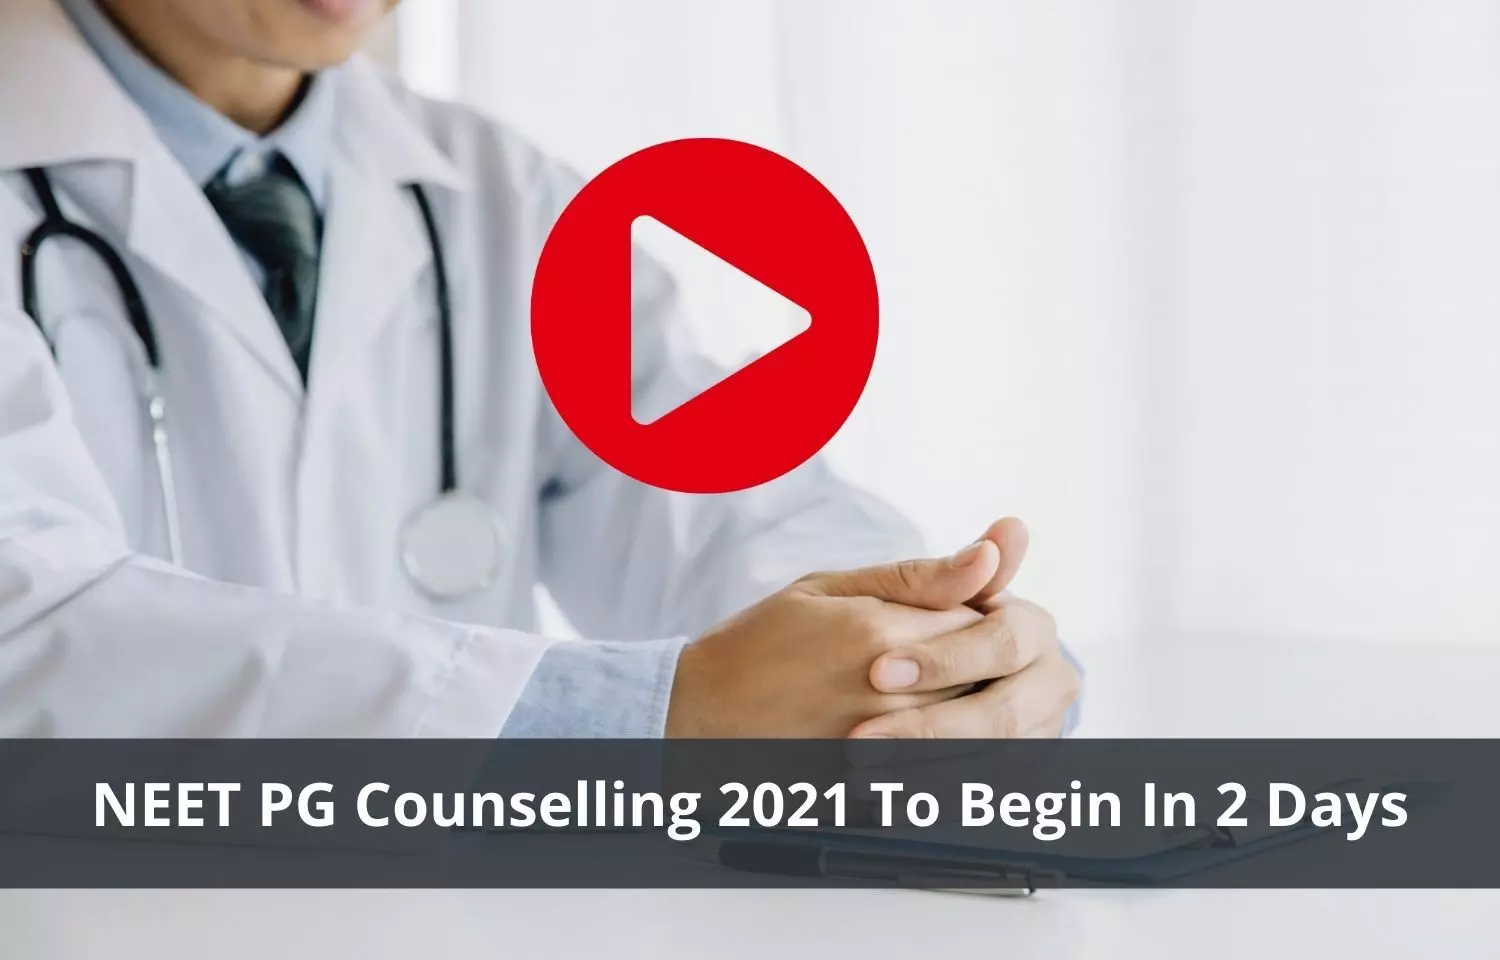 Commencement of NEET PG Counselling 2021 to Begin In 2 Days